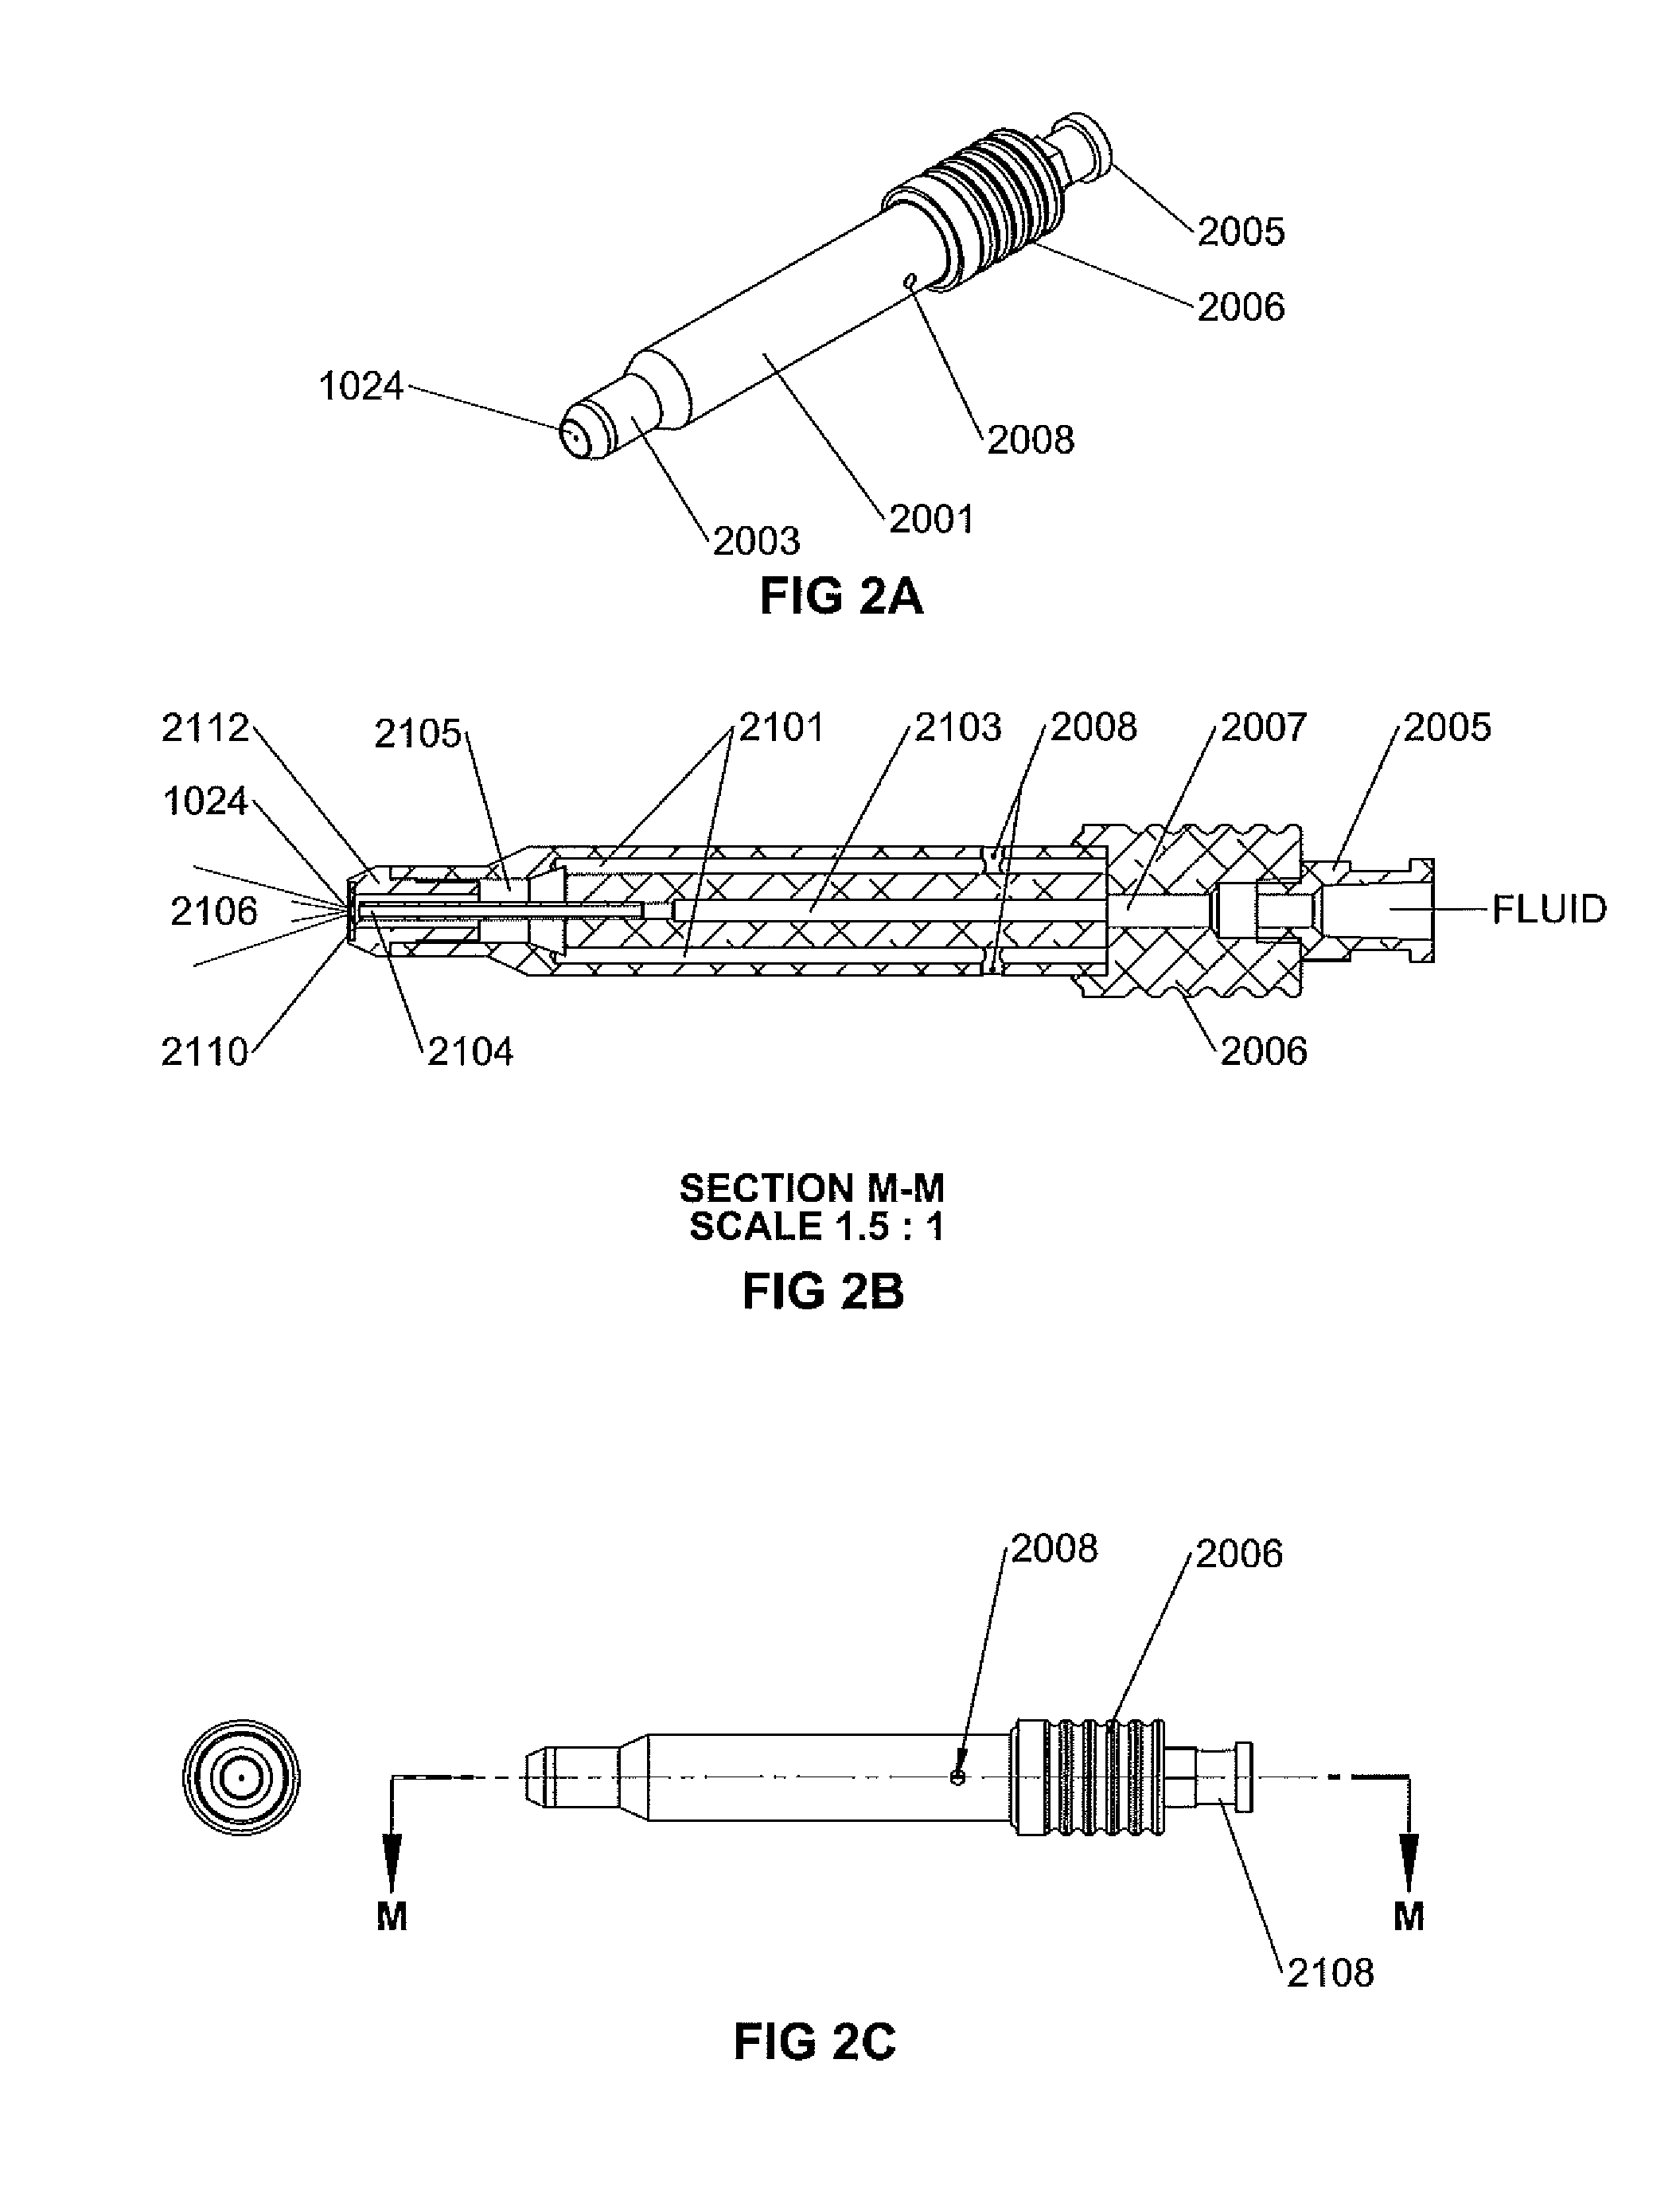 Flow conditioner for a compact, low flow resistance aerosol generator